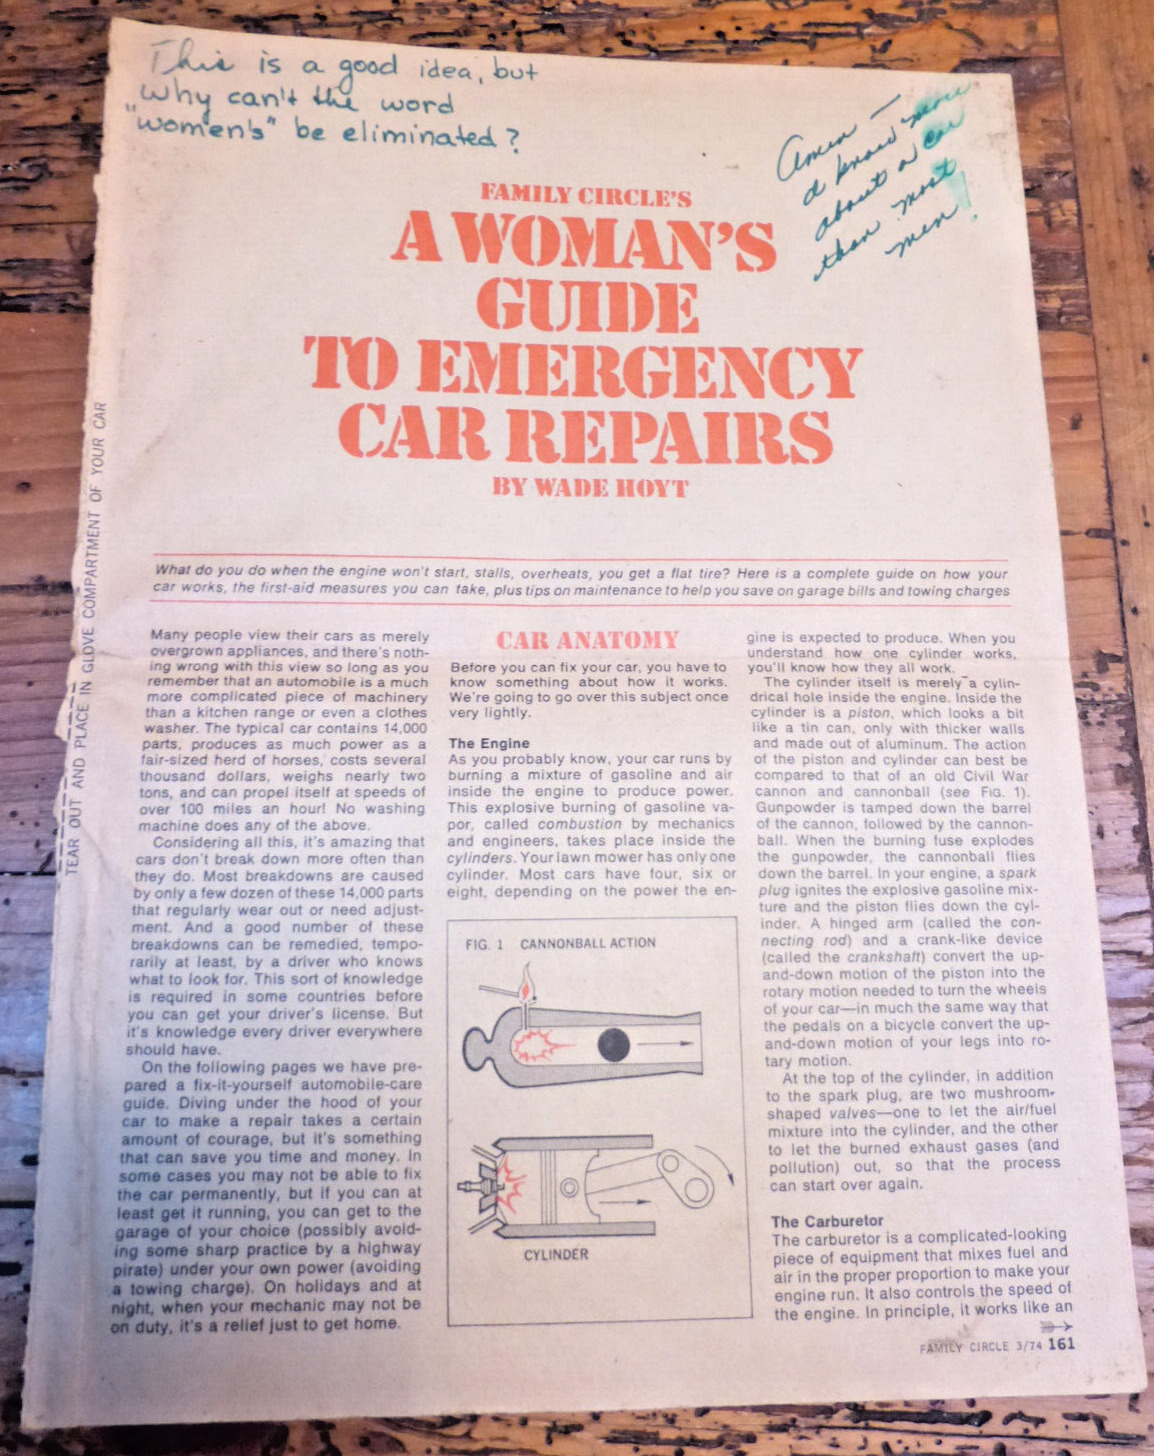 VNTG 1974 WOMAN\'S Guide To EMERGENCY Car REPAIR Family CIRCLE 8 page ILLUSTRATED